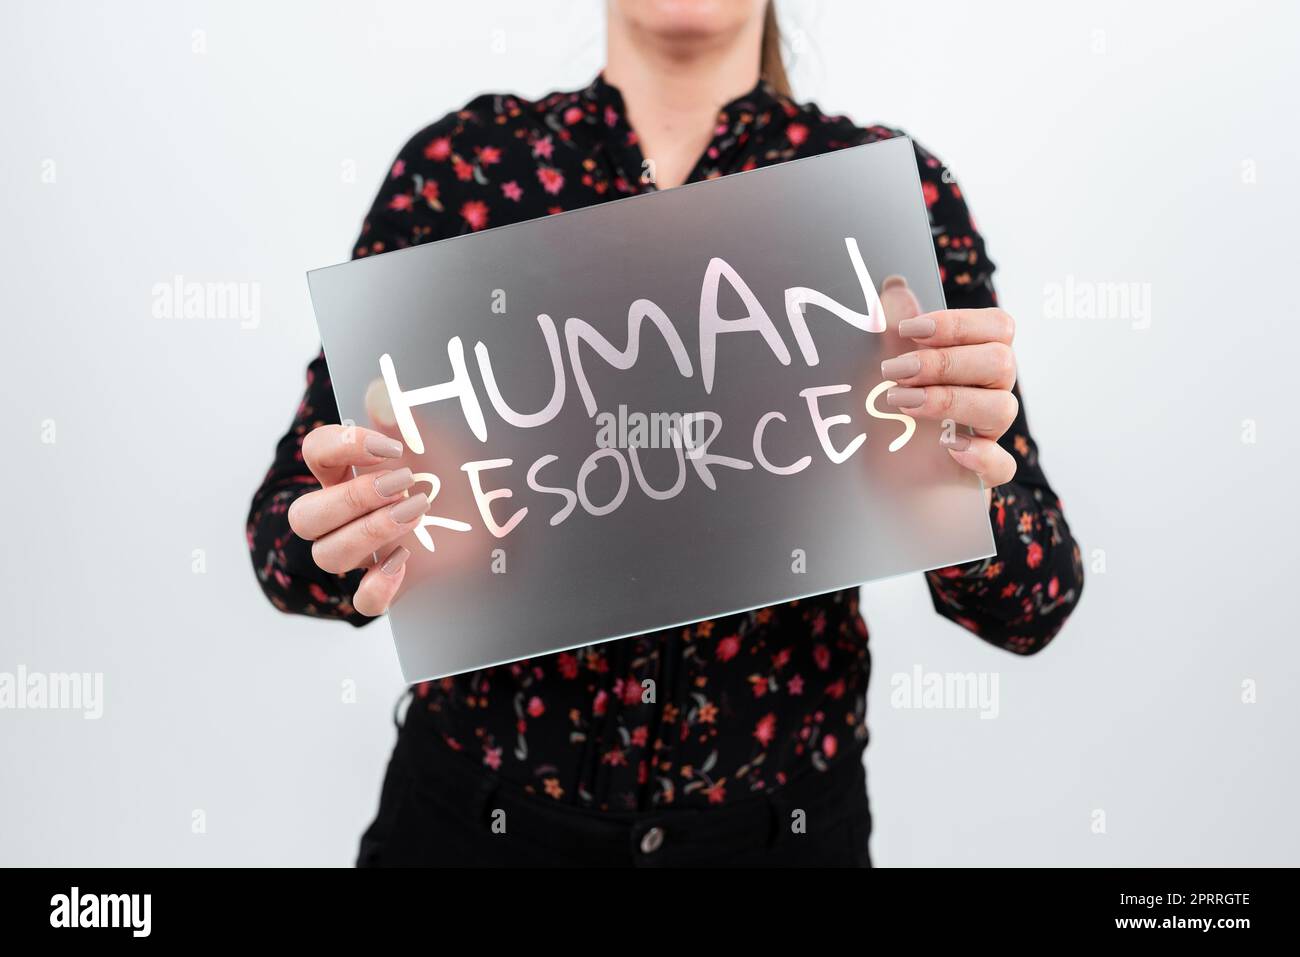 Sign displaying Human ResourcesThe people who make up the workforce of an organization. Concept meaning The showing who make up the workforce of an organization Stock Photo